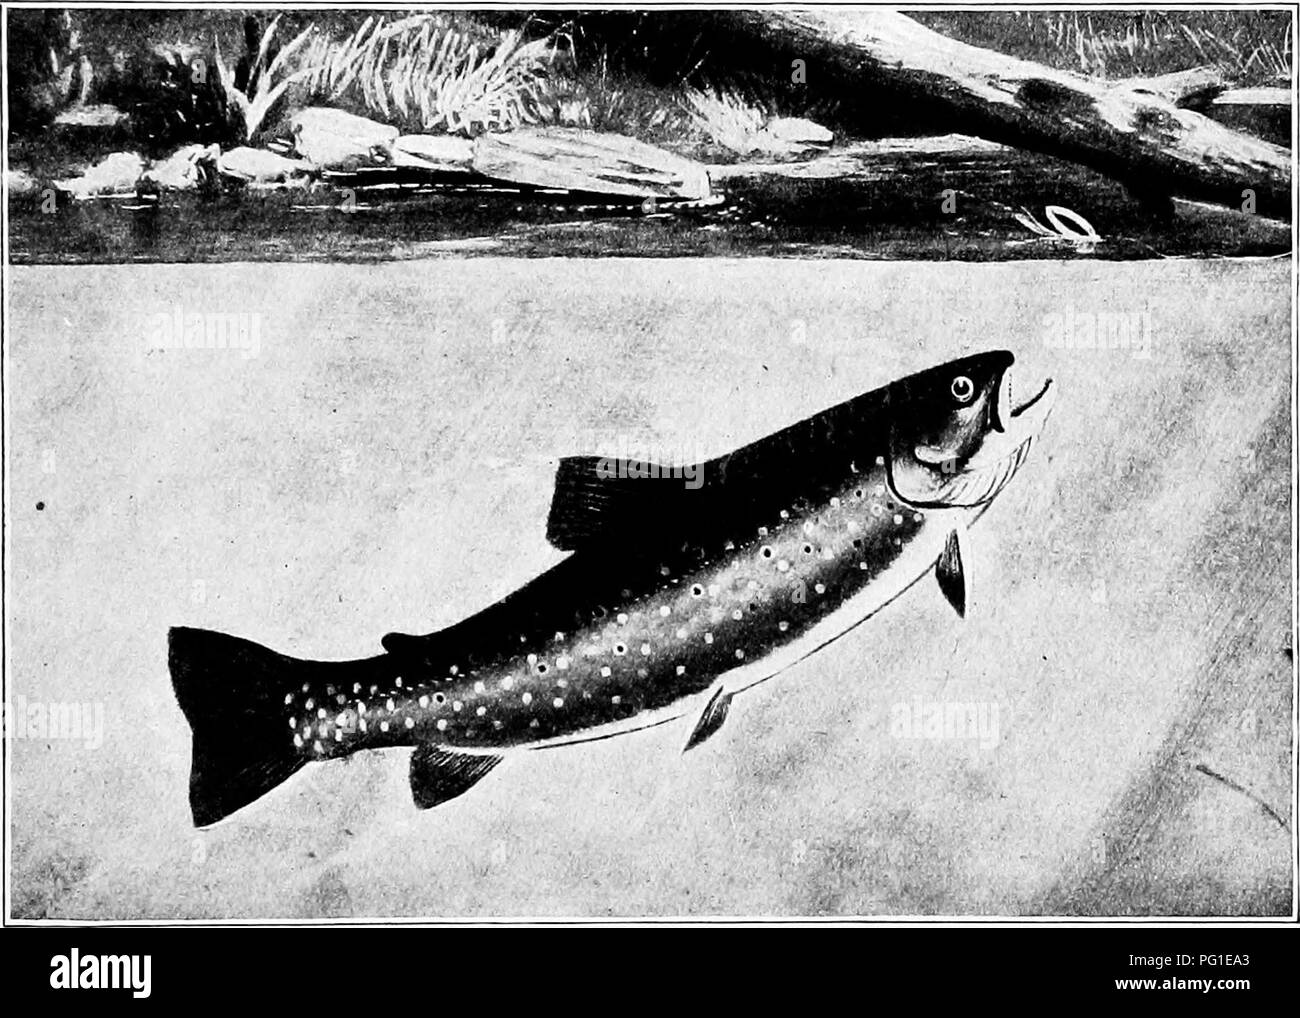 . The American natural history; a foundation of useful knowledge of the higher animals of North America. Natural history. BROOK TROUT 227 well backed by the forest shadows that painters love. Usu- ally the music of rushing water pervades the haunt of the Brook Trout; and the only cloud upon it all is that, ever and anon, Man, the supposedly high-minded, savagely bends. THE EASTERN BROOK TROUT. every energy to kill an unduly great number of these beau- tiful creatures, and fills a sordid creel entirelj^ too full. Most unluckily for the Trout, it is its habit to be ever on the alert for insects  Stock Photo